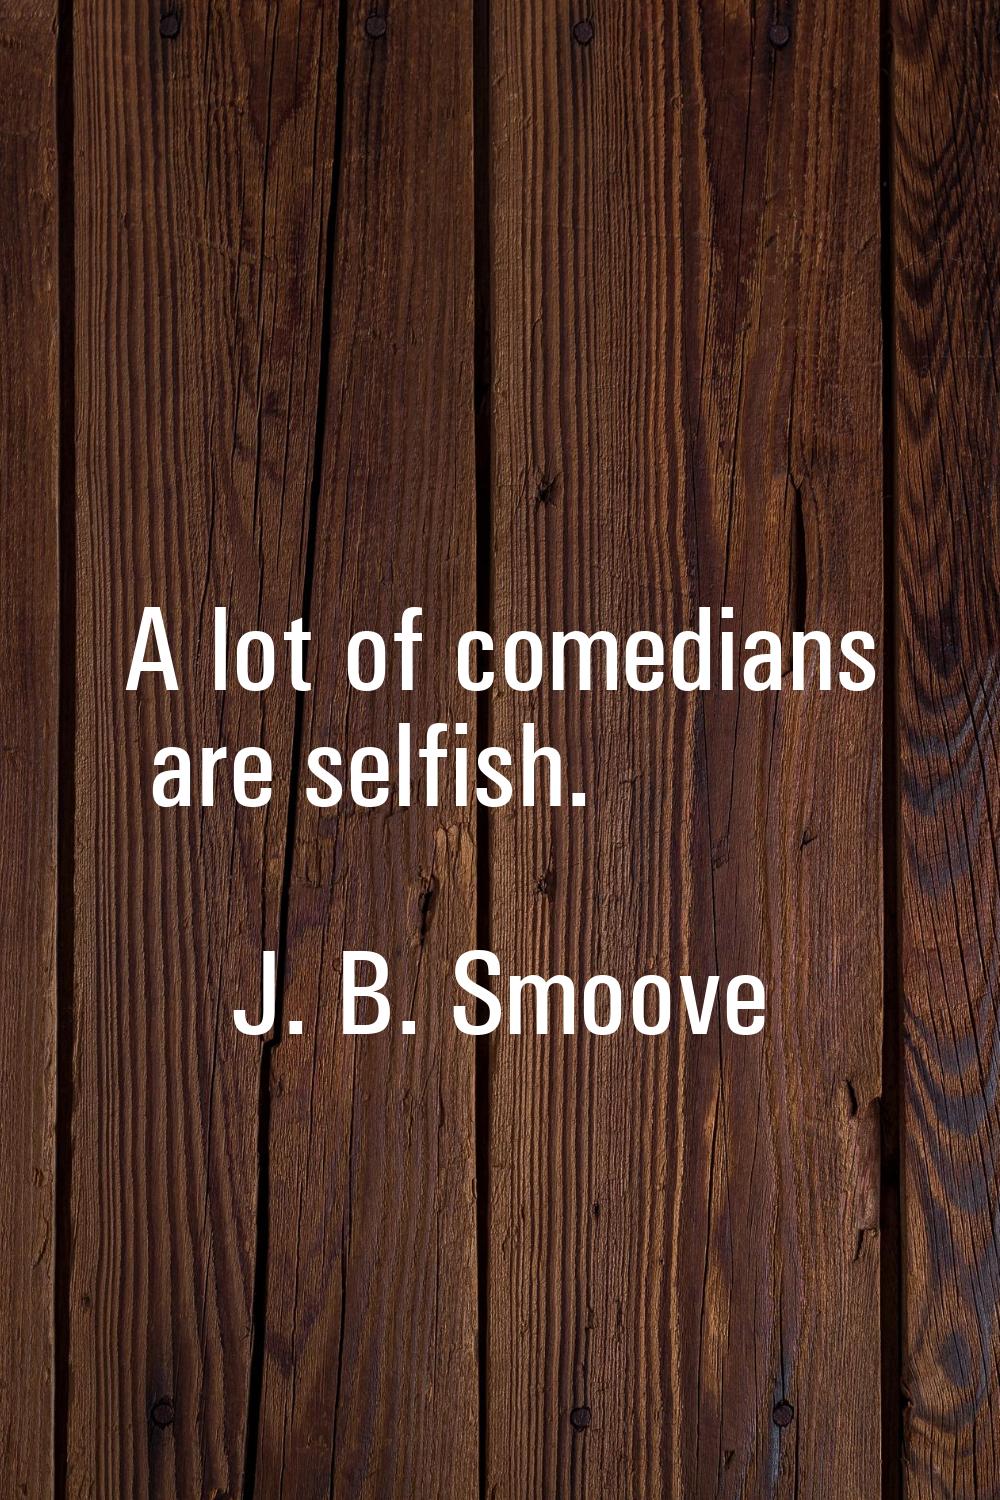 A lot of comedians are selfish.